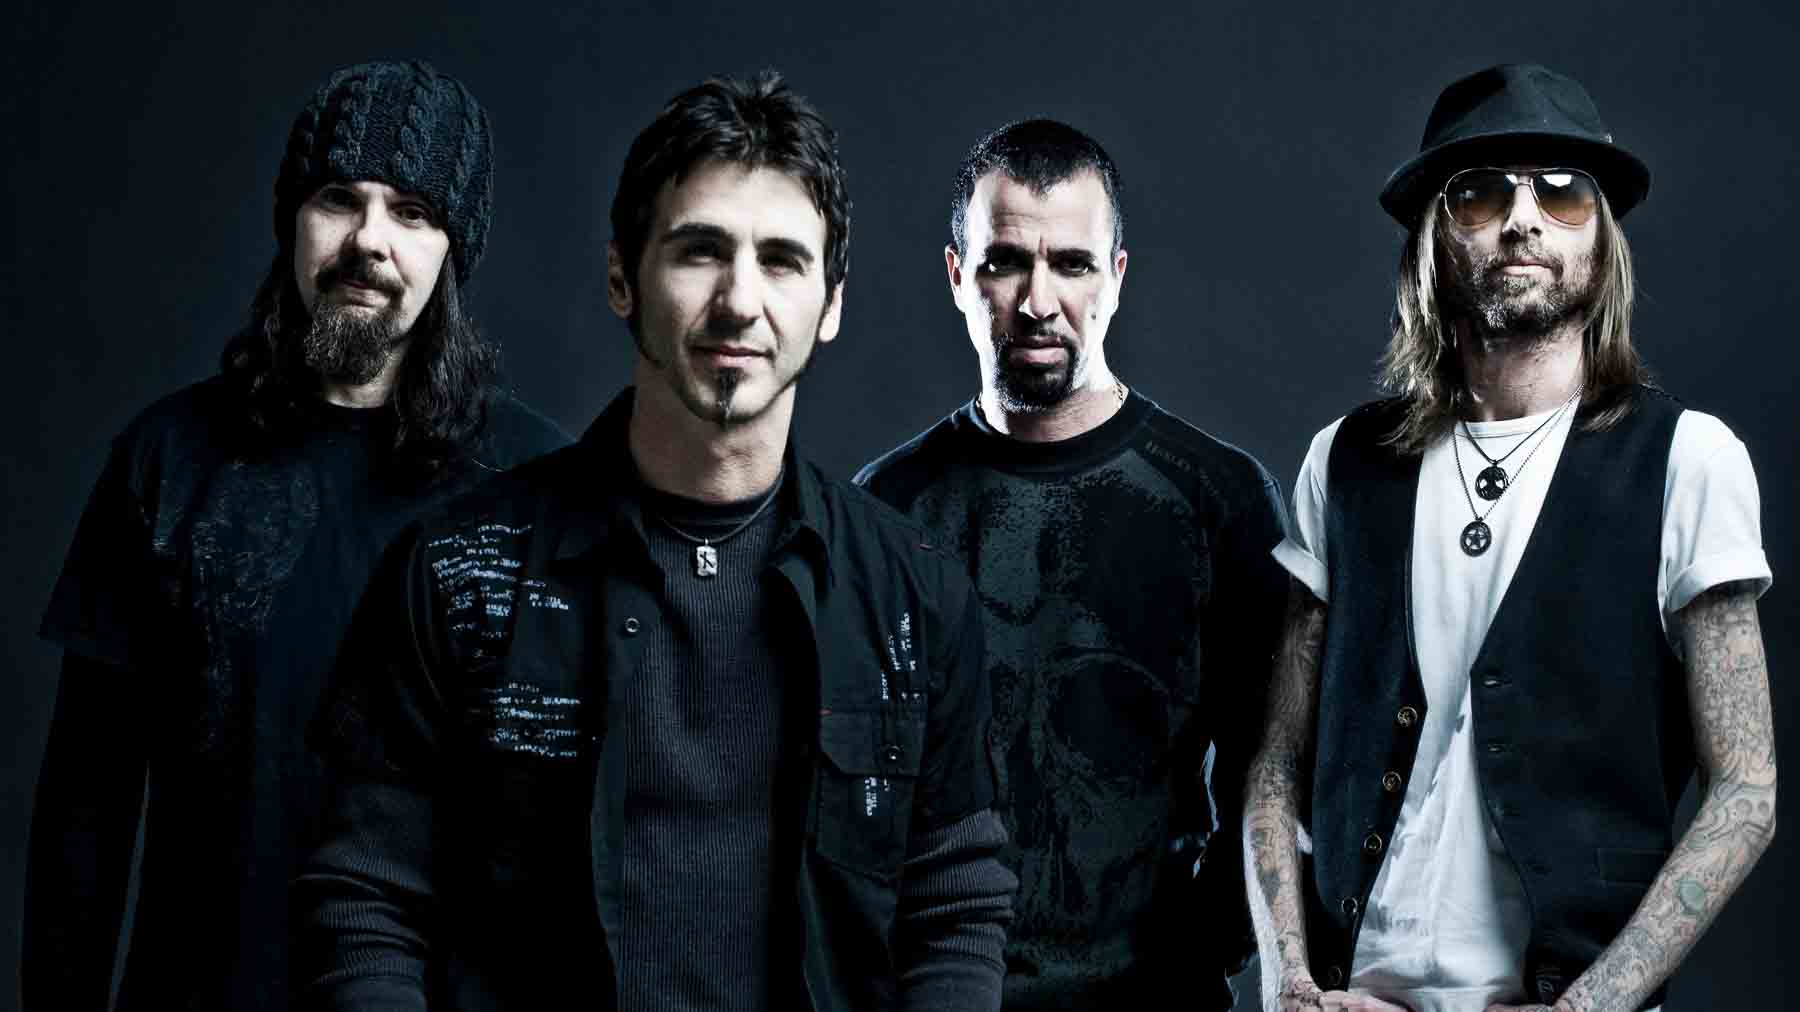 Godsmack is an American rock band from Lawrence, Massachusetts, formed in 1995. The band is composed of founder, frontman and song...